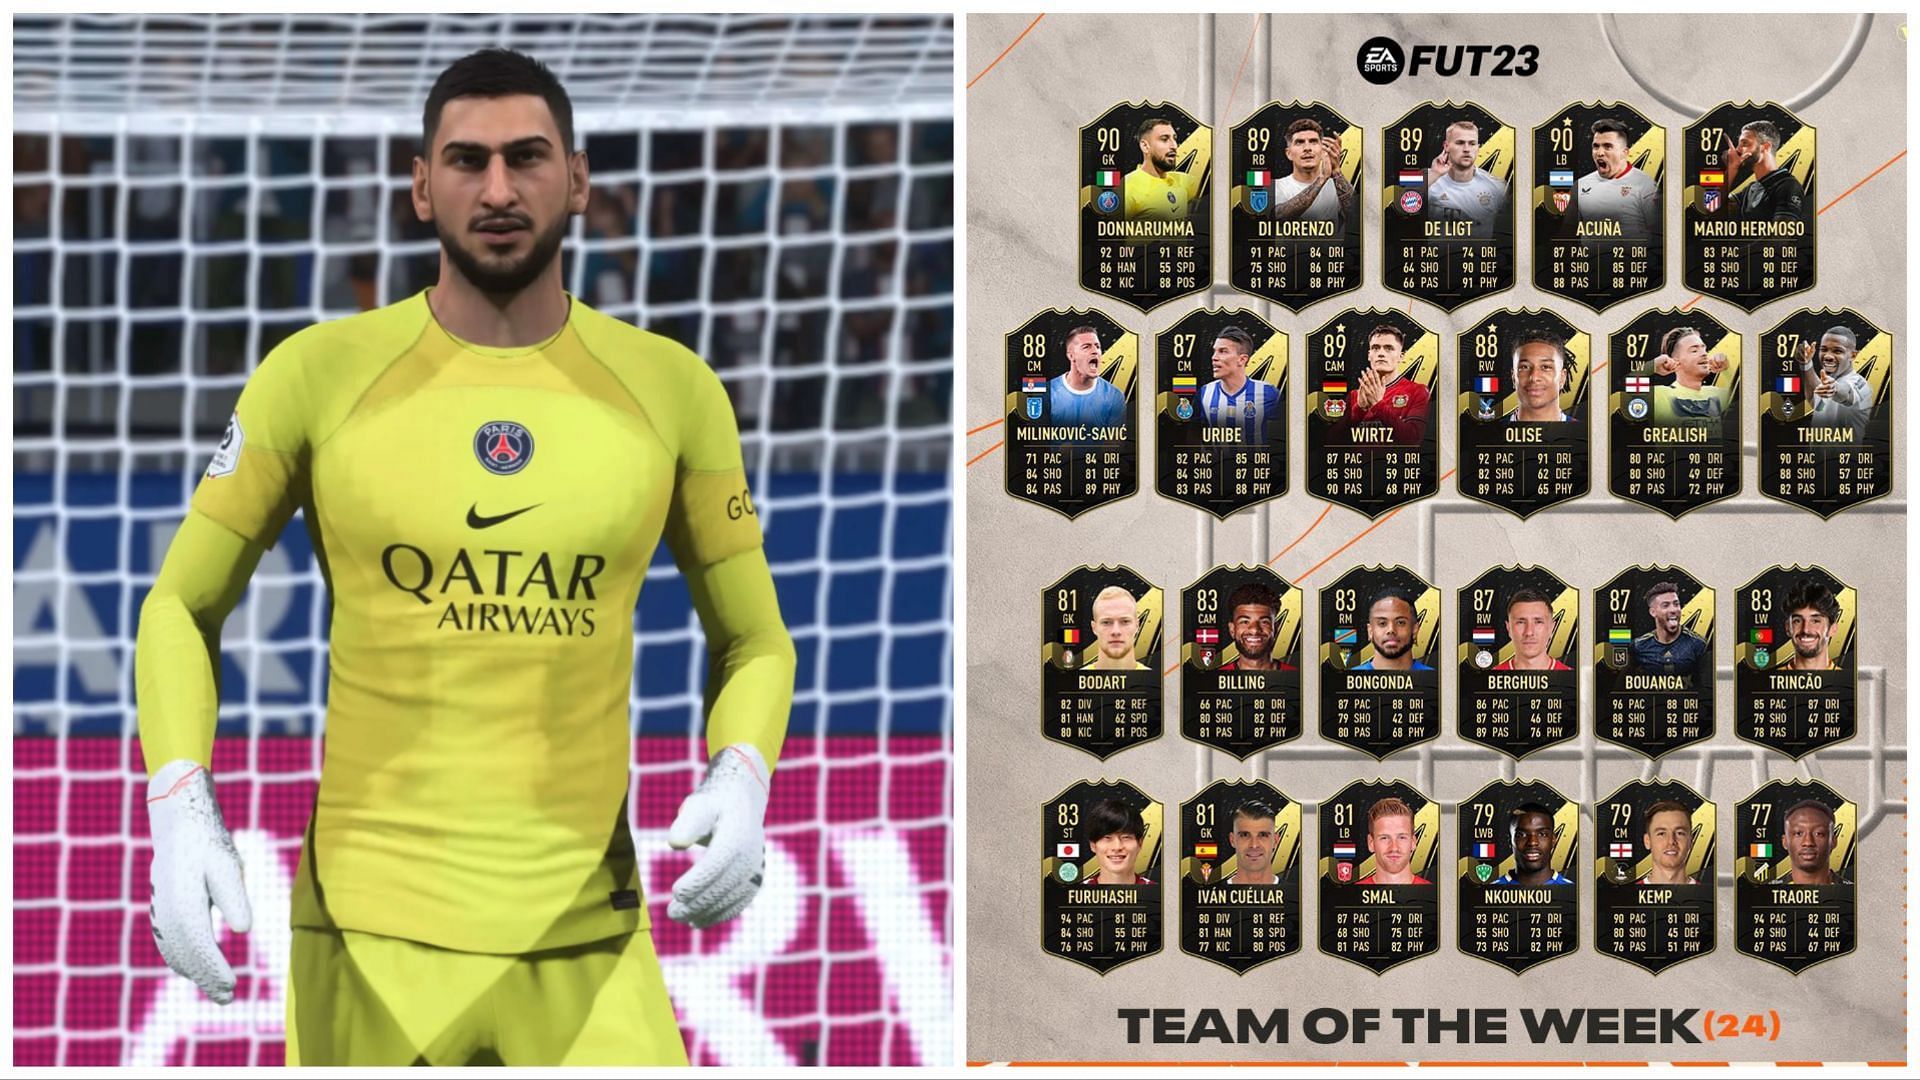 TOTW 24 is live in FIFA 23 (Images via EA Sports)